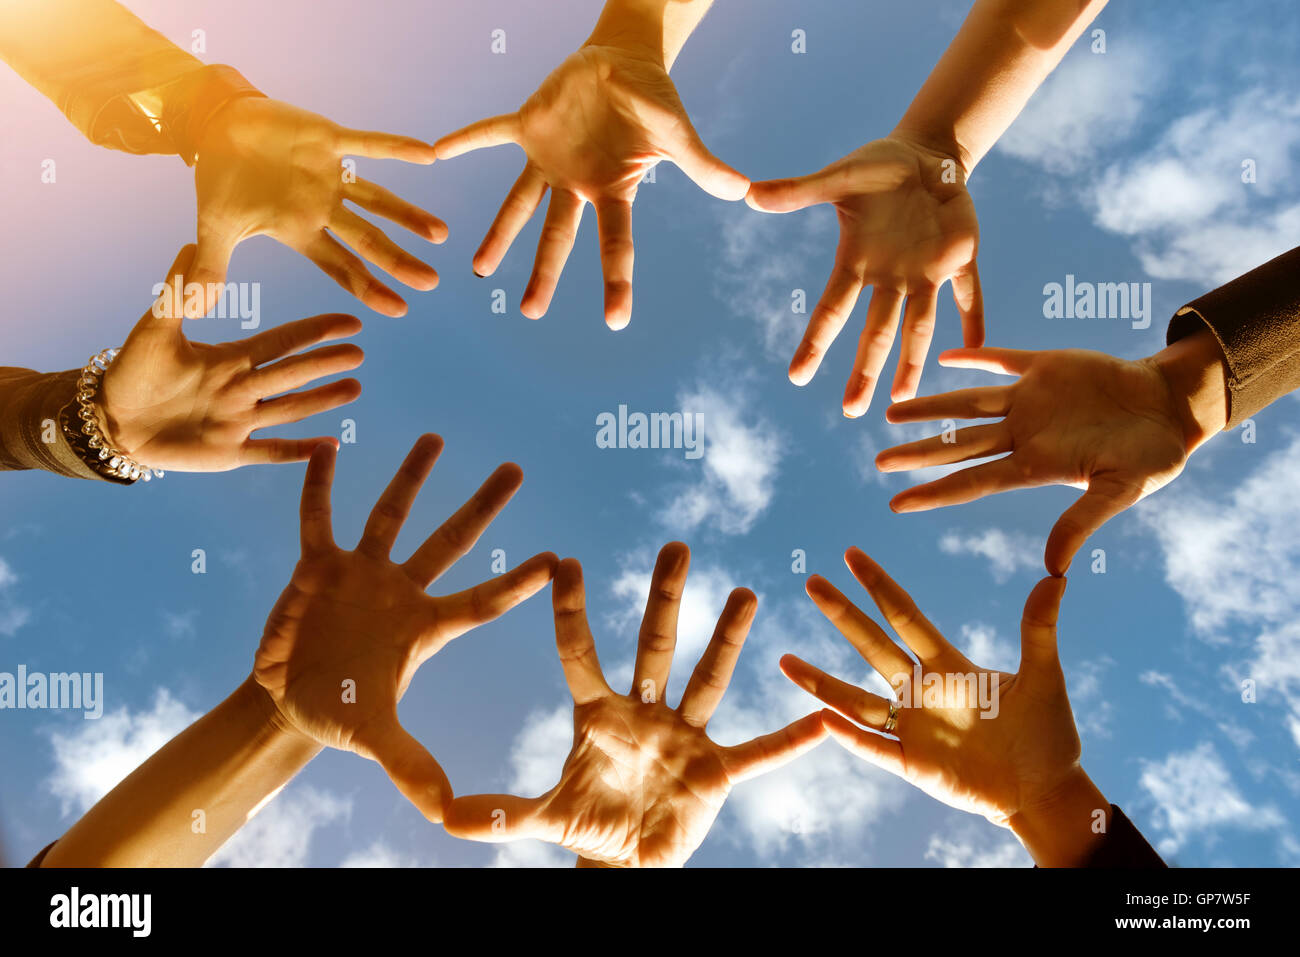 Friendsship team concept with many hands in circle Stock Photo